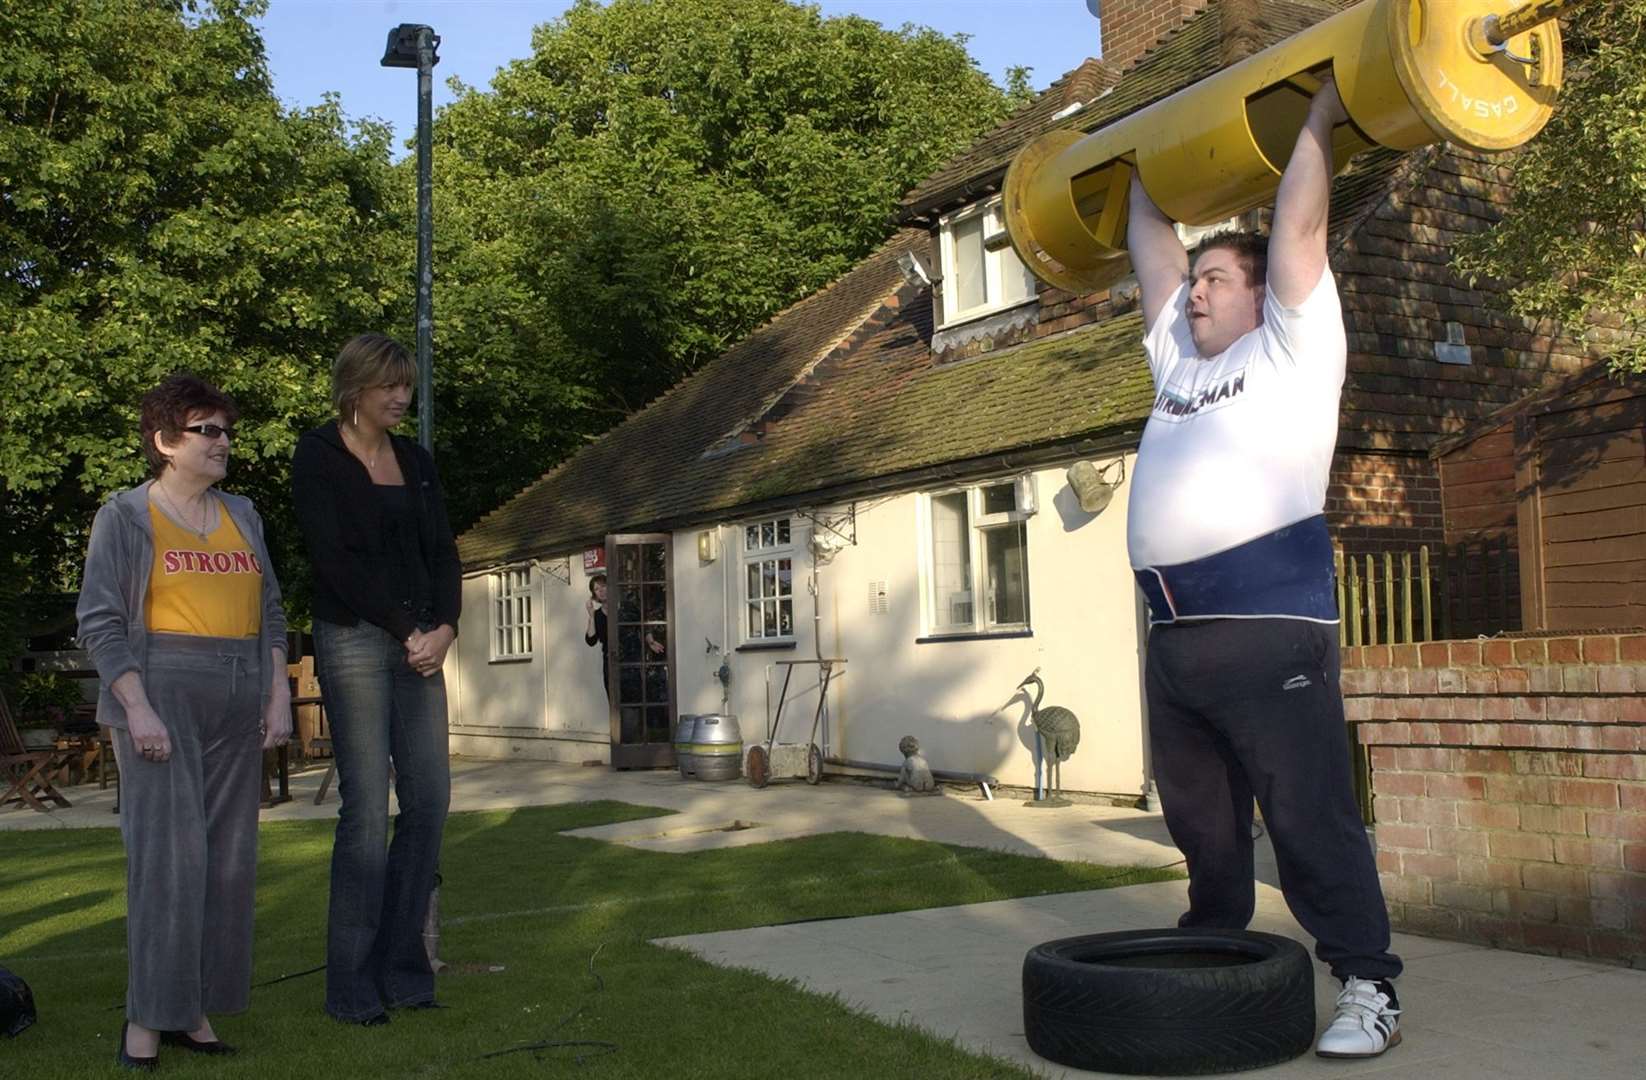 Colin Anderson lifts a 100kg log as many times as possible in 75 seconds to raise money for charity in 2006